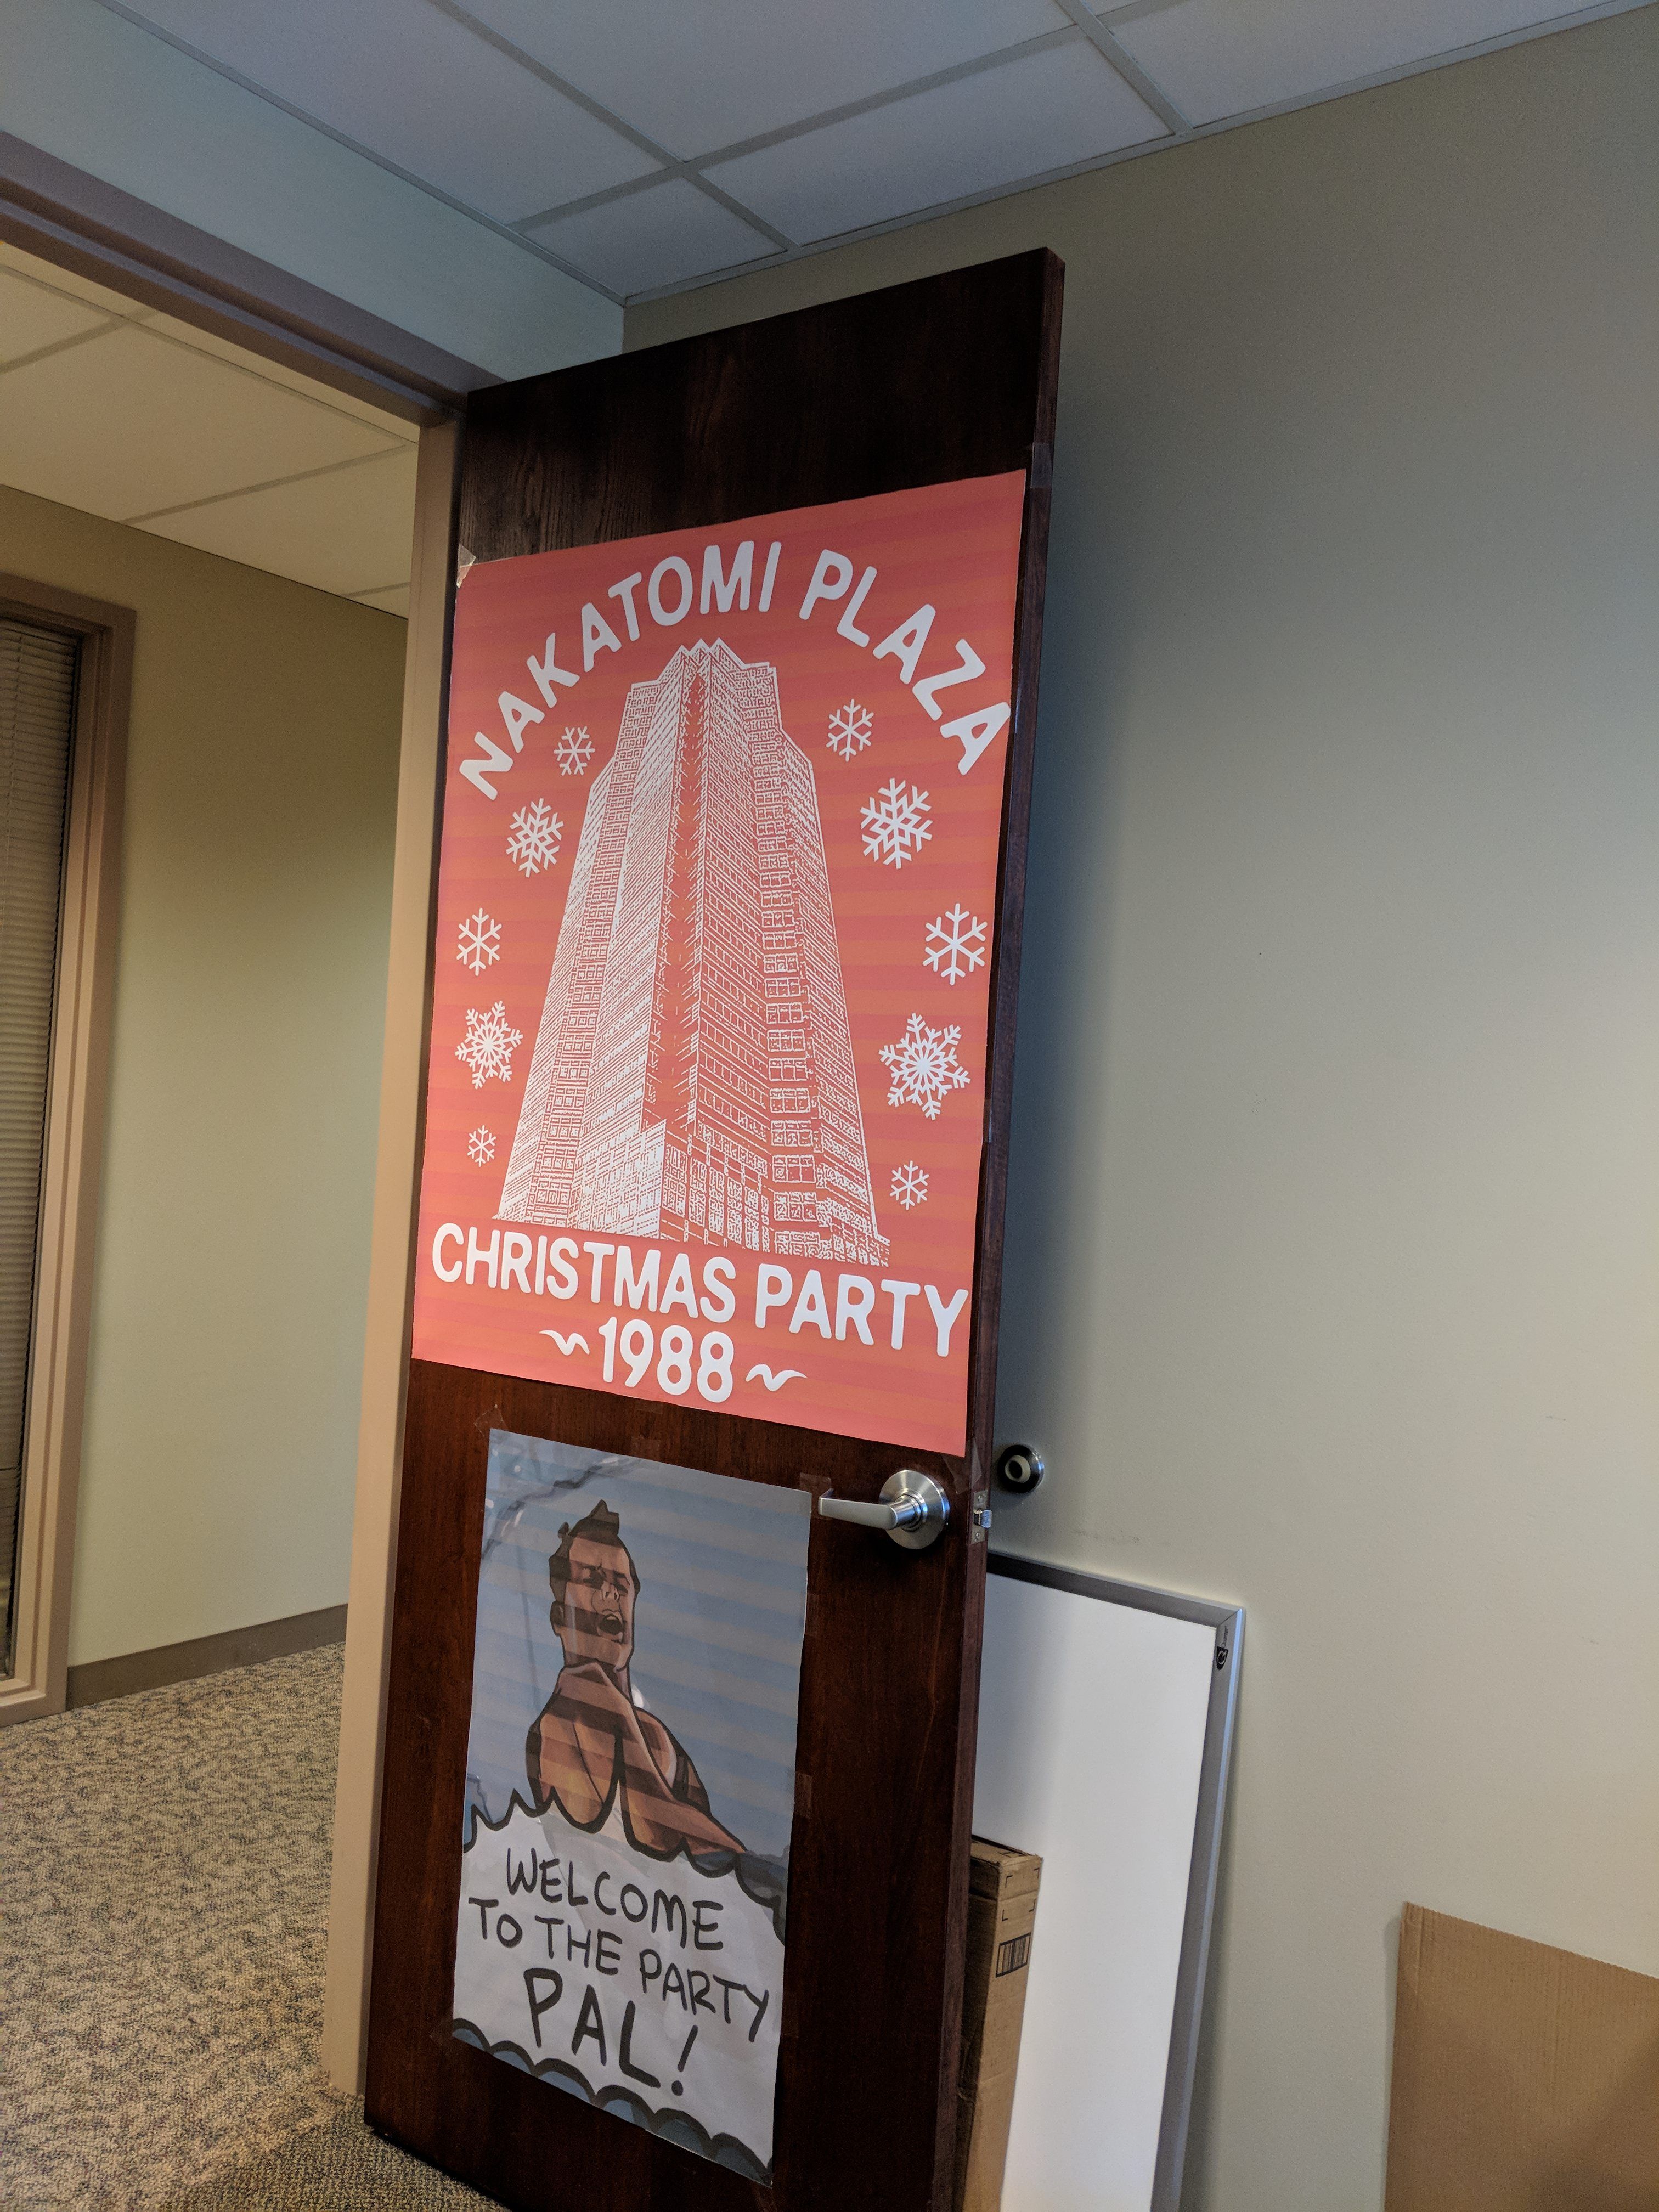 They told me to decorate my office for Christmas